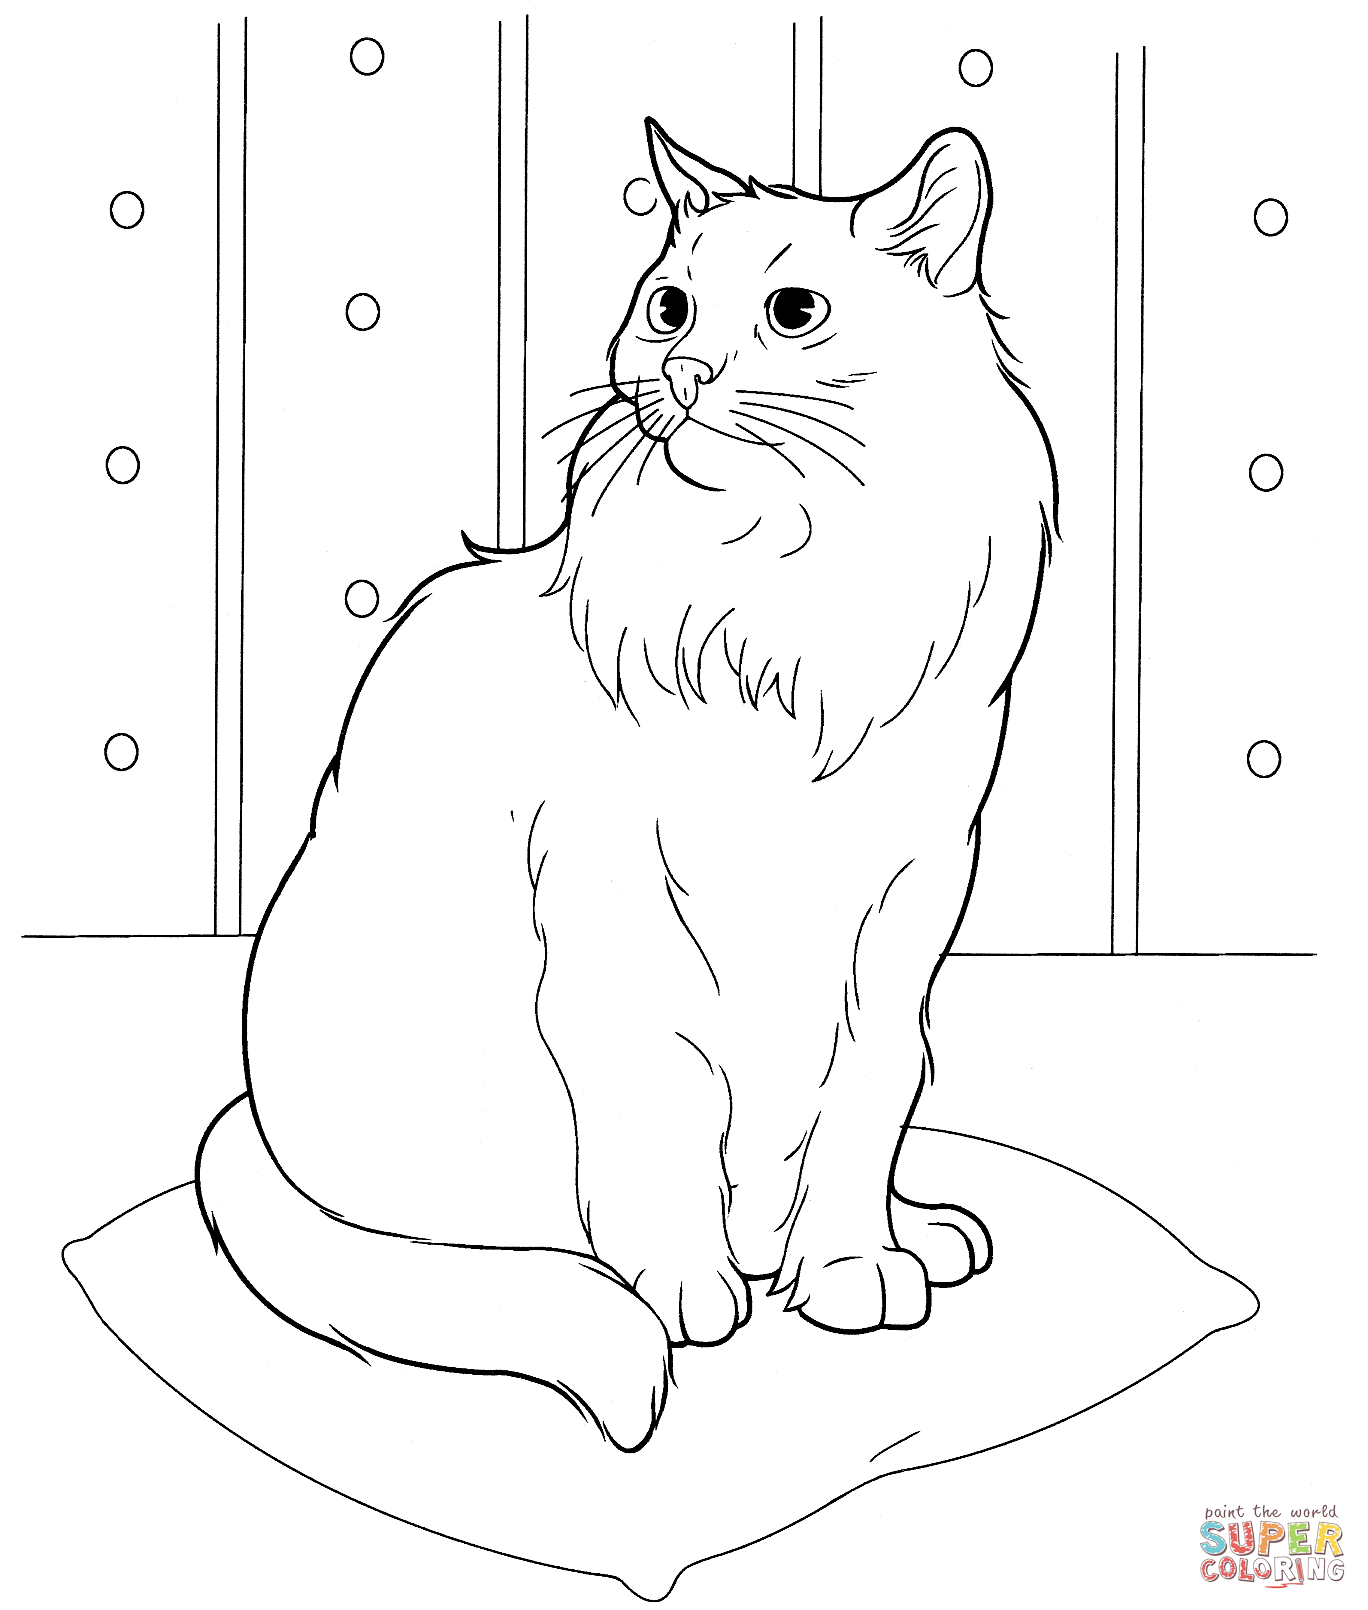 Persain Coloring Pages - Coloring Home